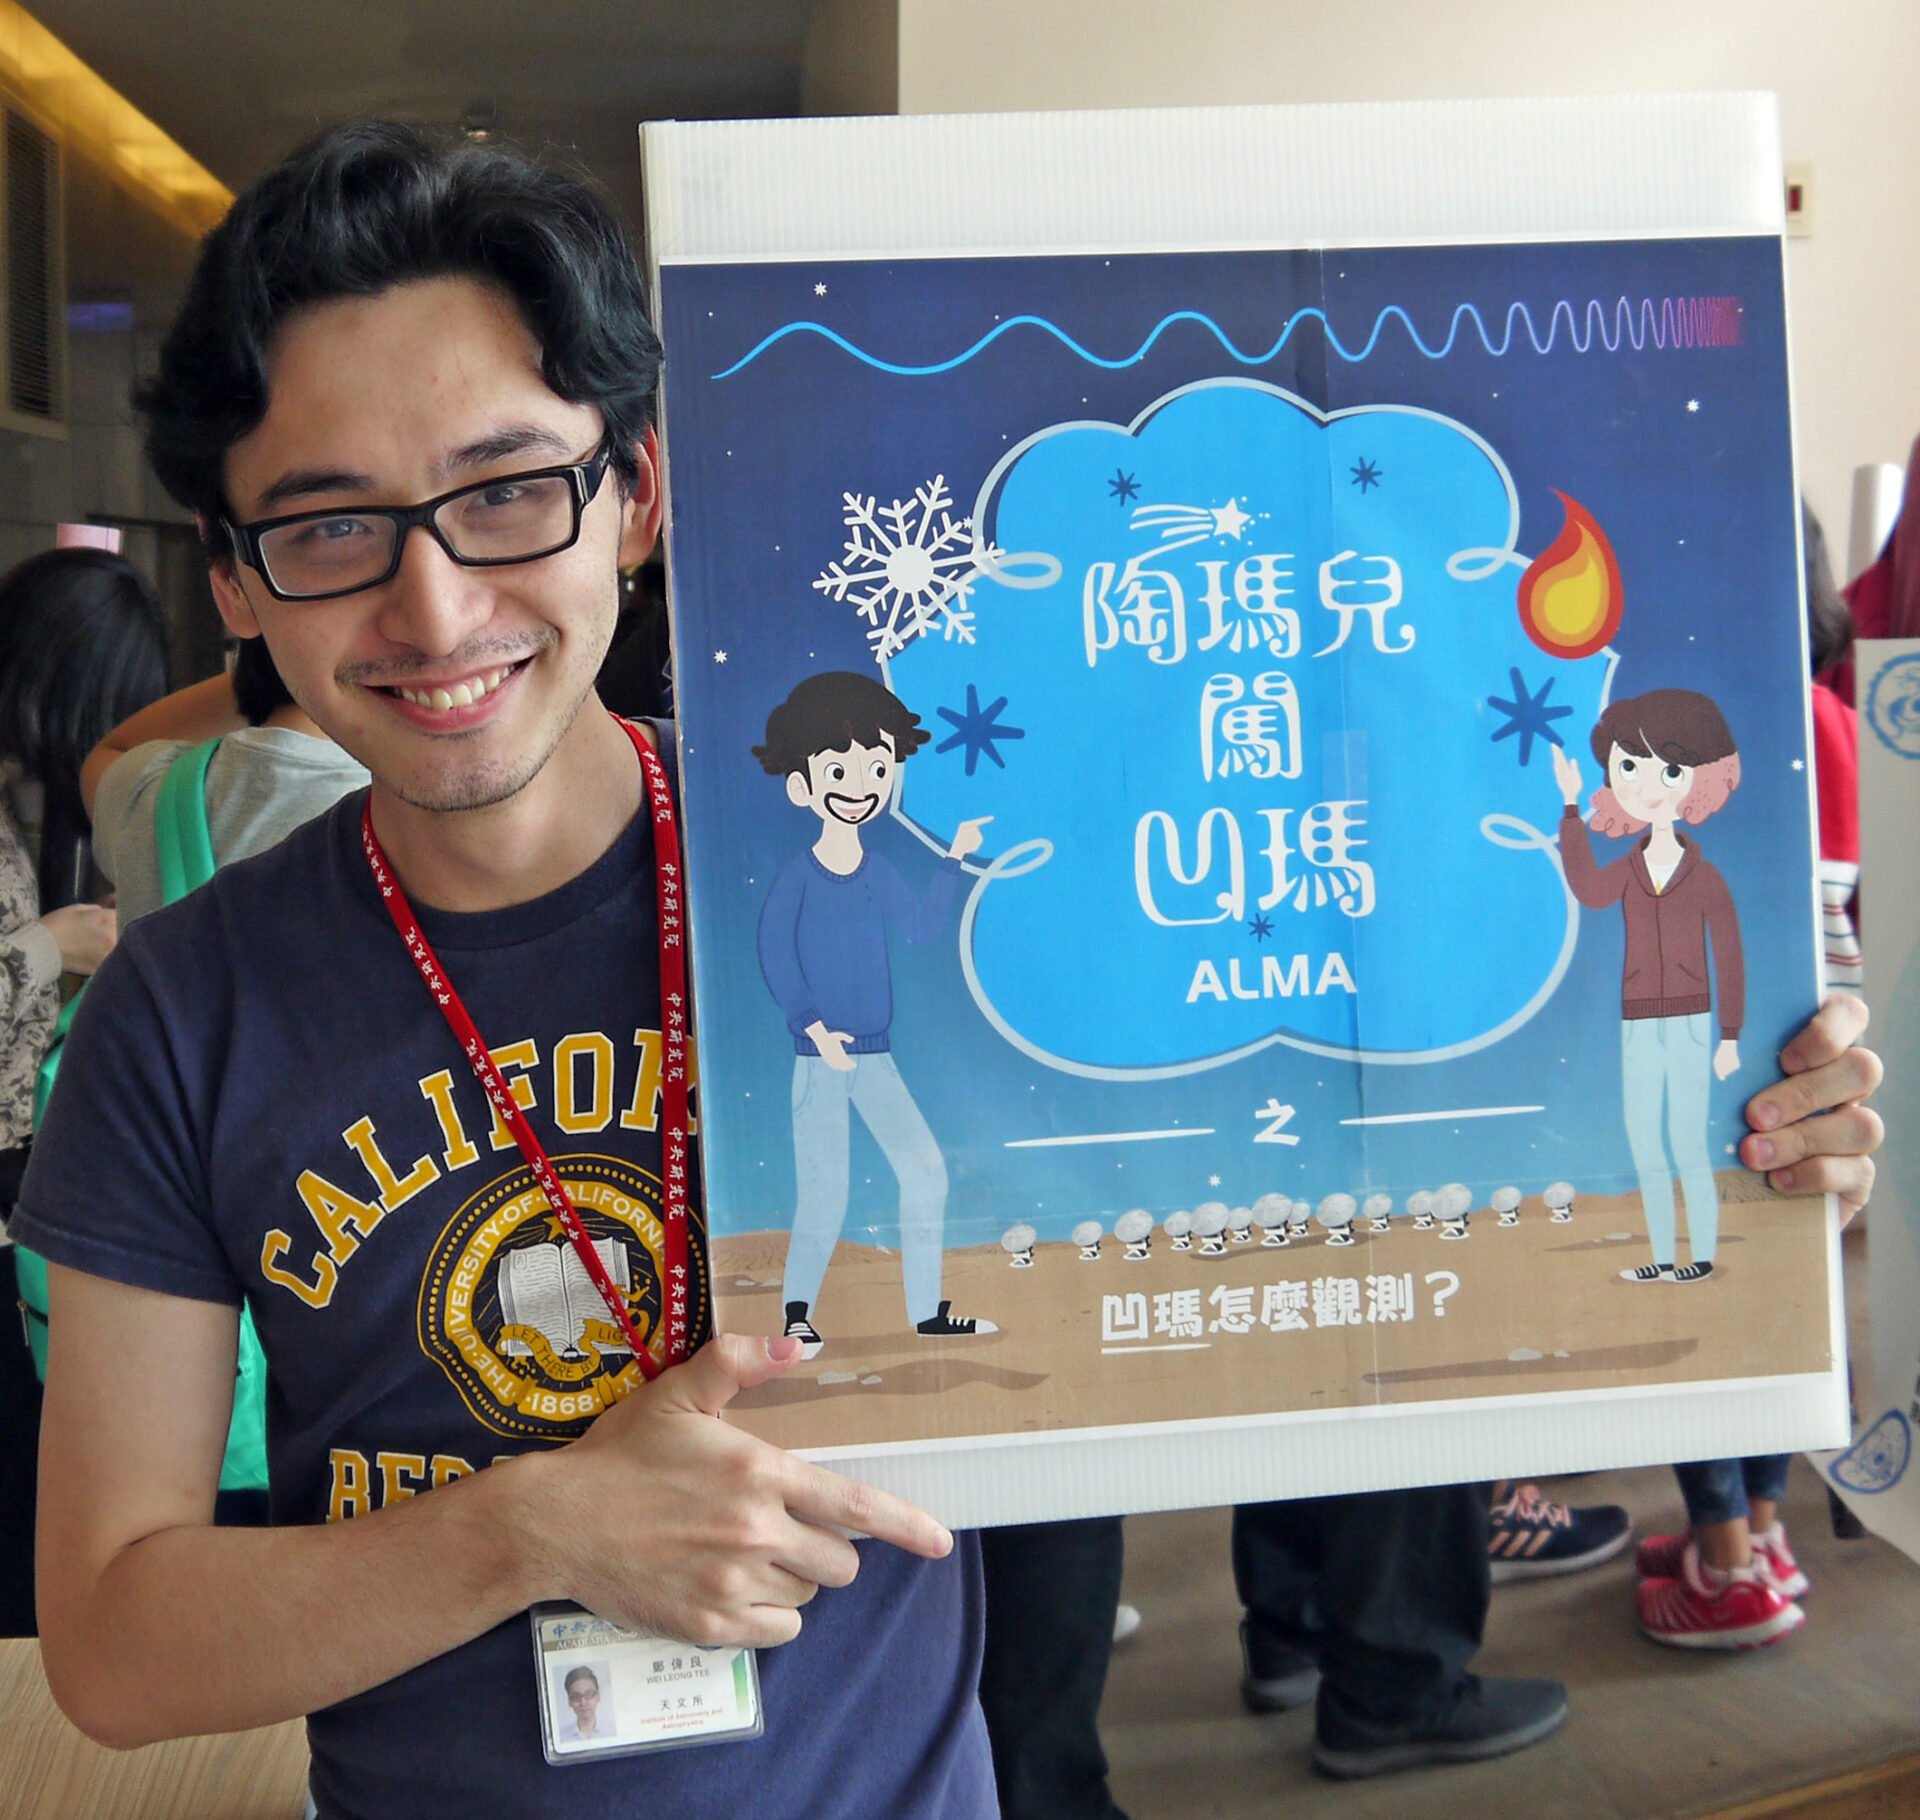 "Talma", the comic character created by ALMA for its children's publications, conquers the hearts of children at a science broadcast fair in Taiwan. © ALMA (ESO / NAOJ / NRAO)